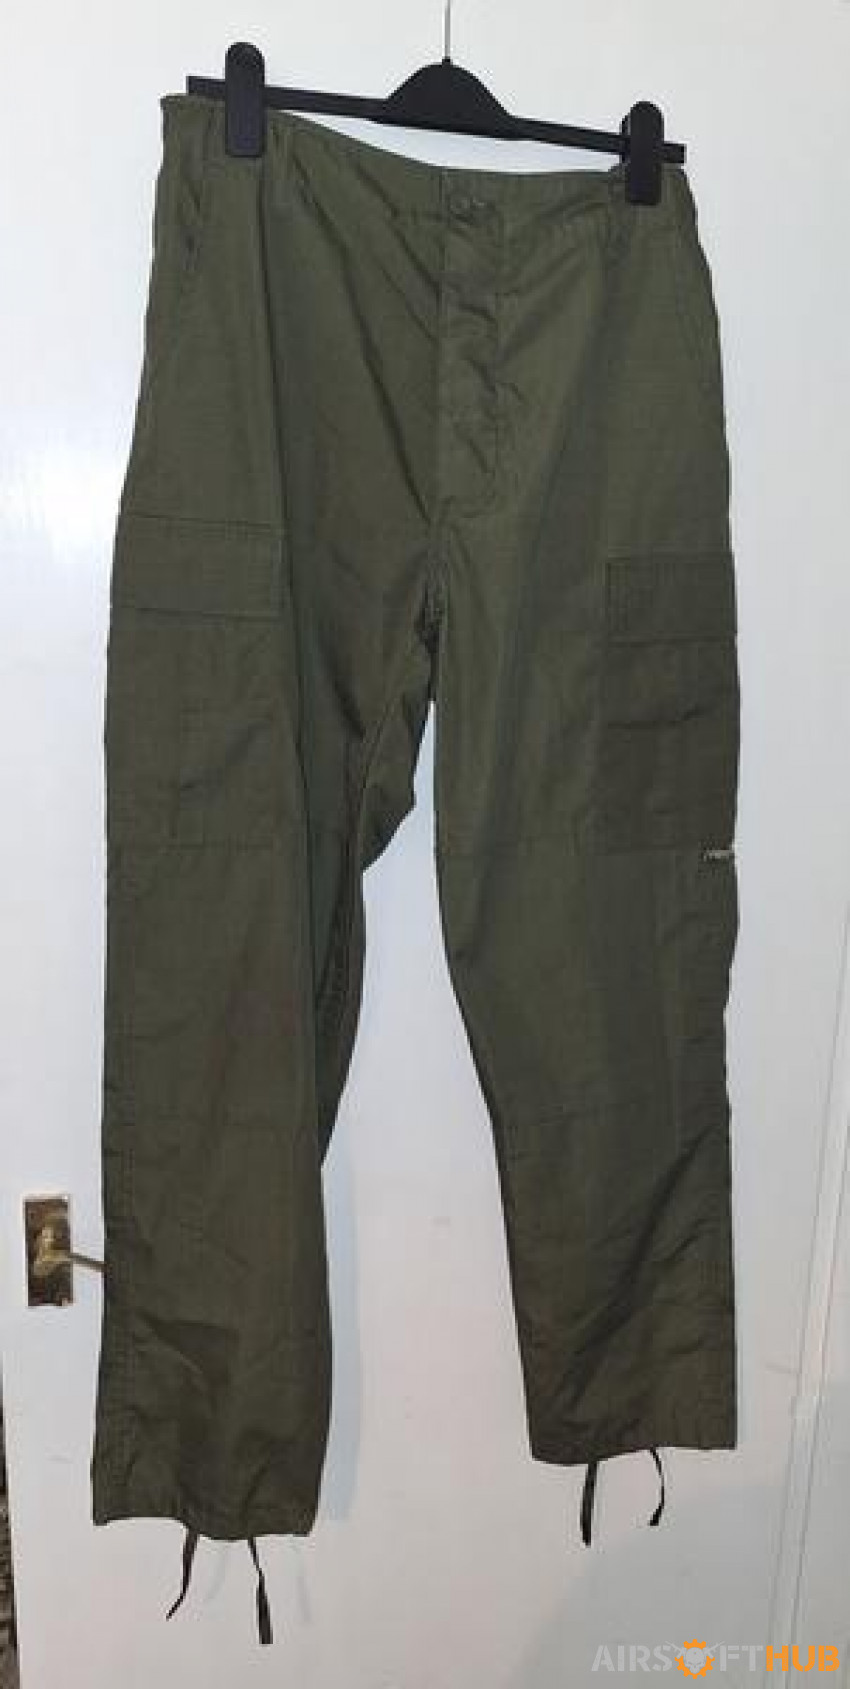 Viper green jacket and trouser - Used airsoft equipment